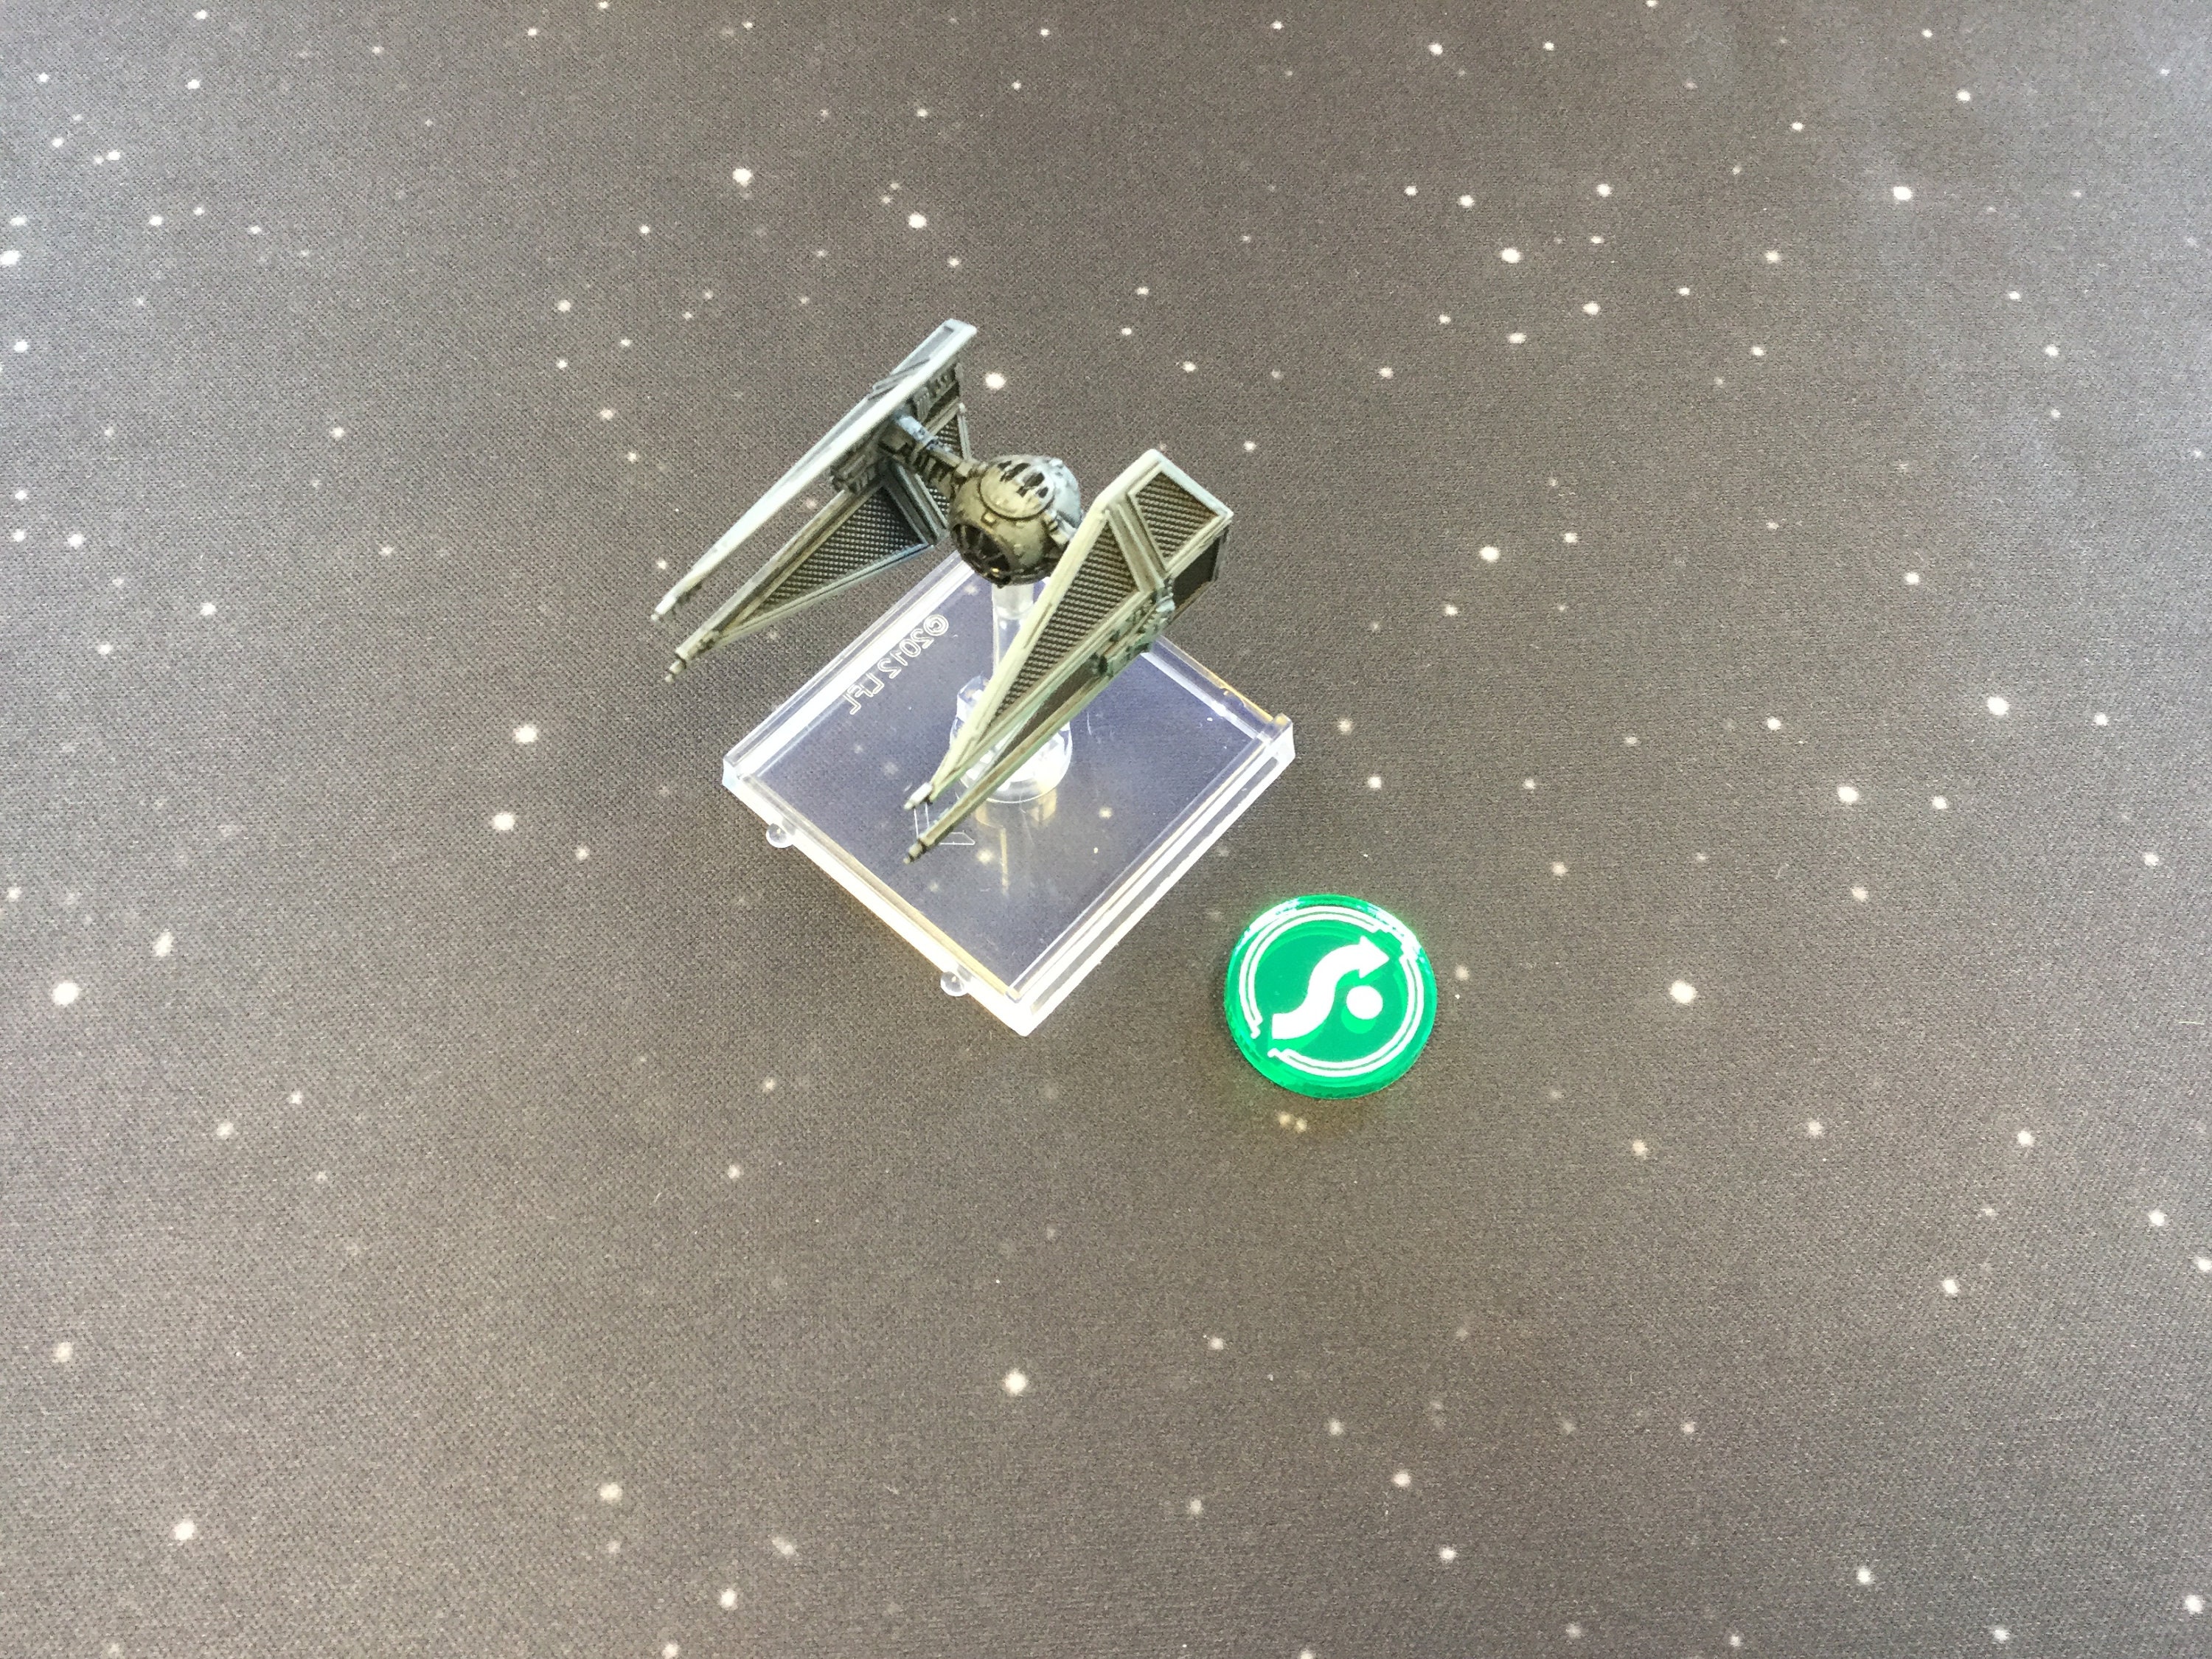 Mirrored Acrylic Evade Tokens for Star Wars X-wing 1.0 